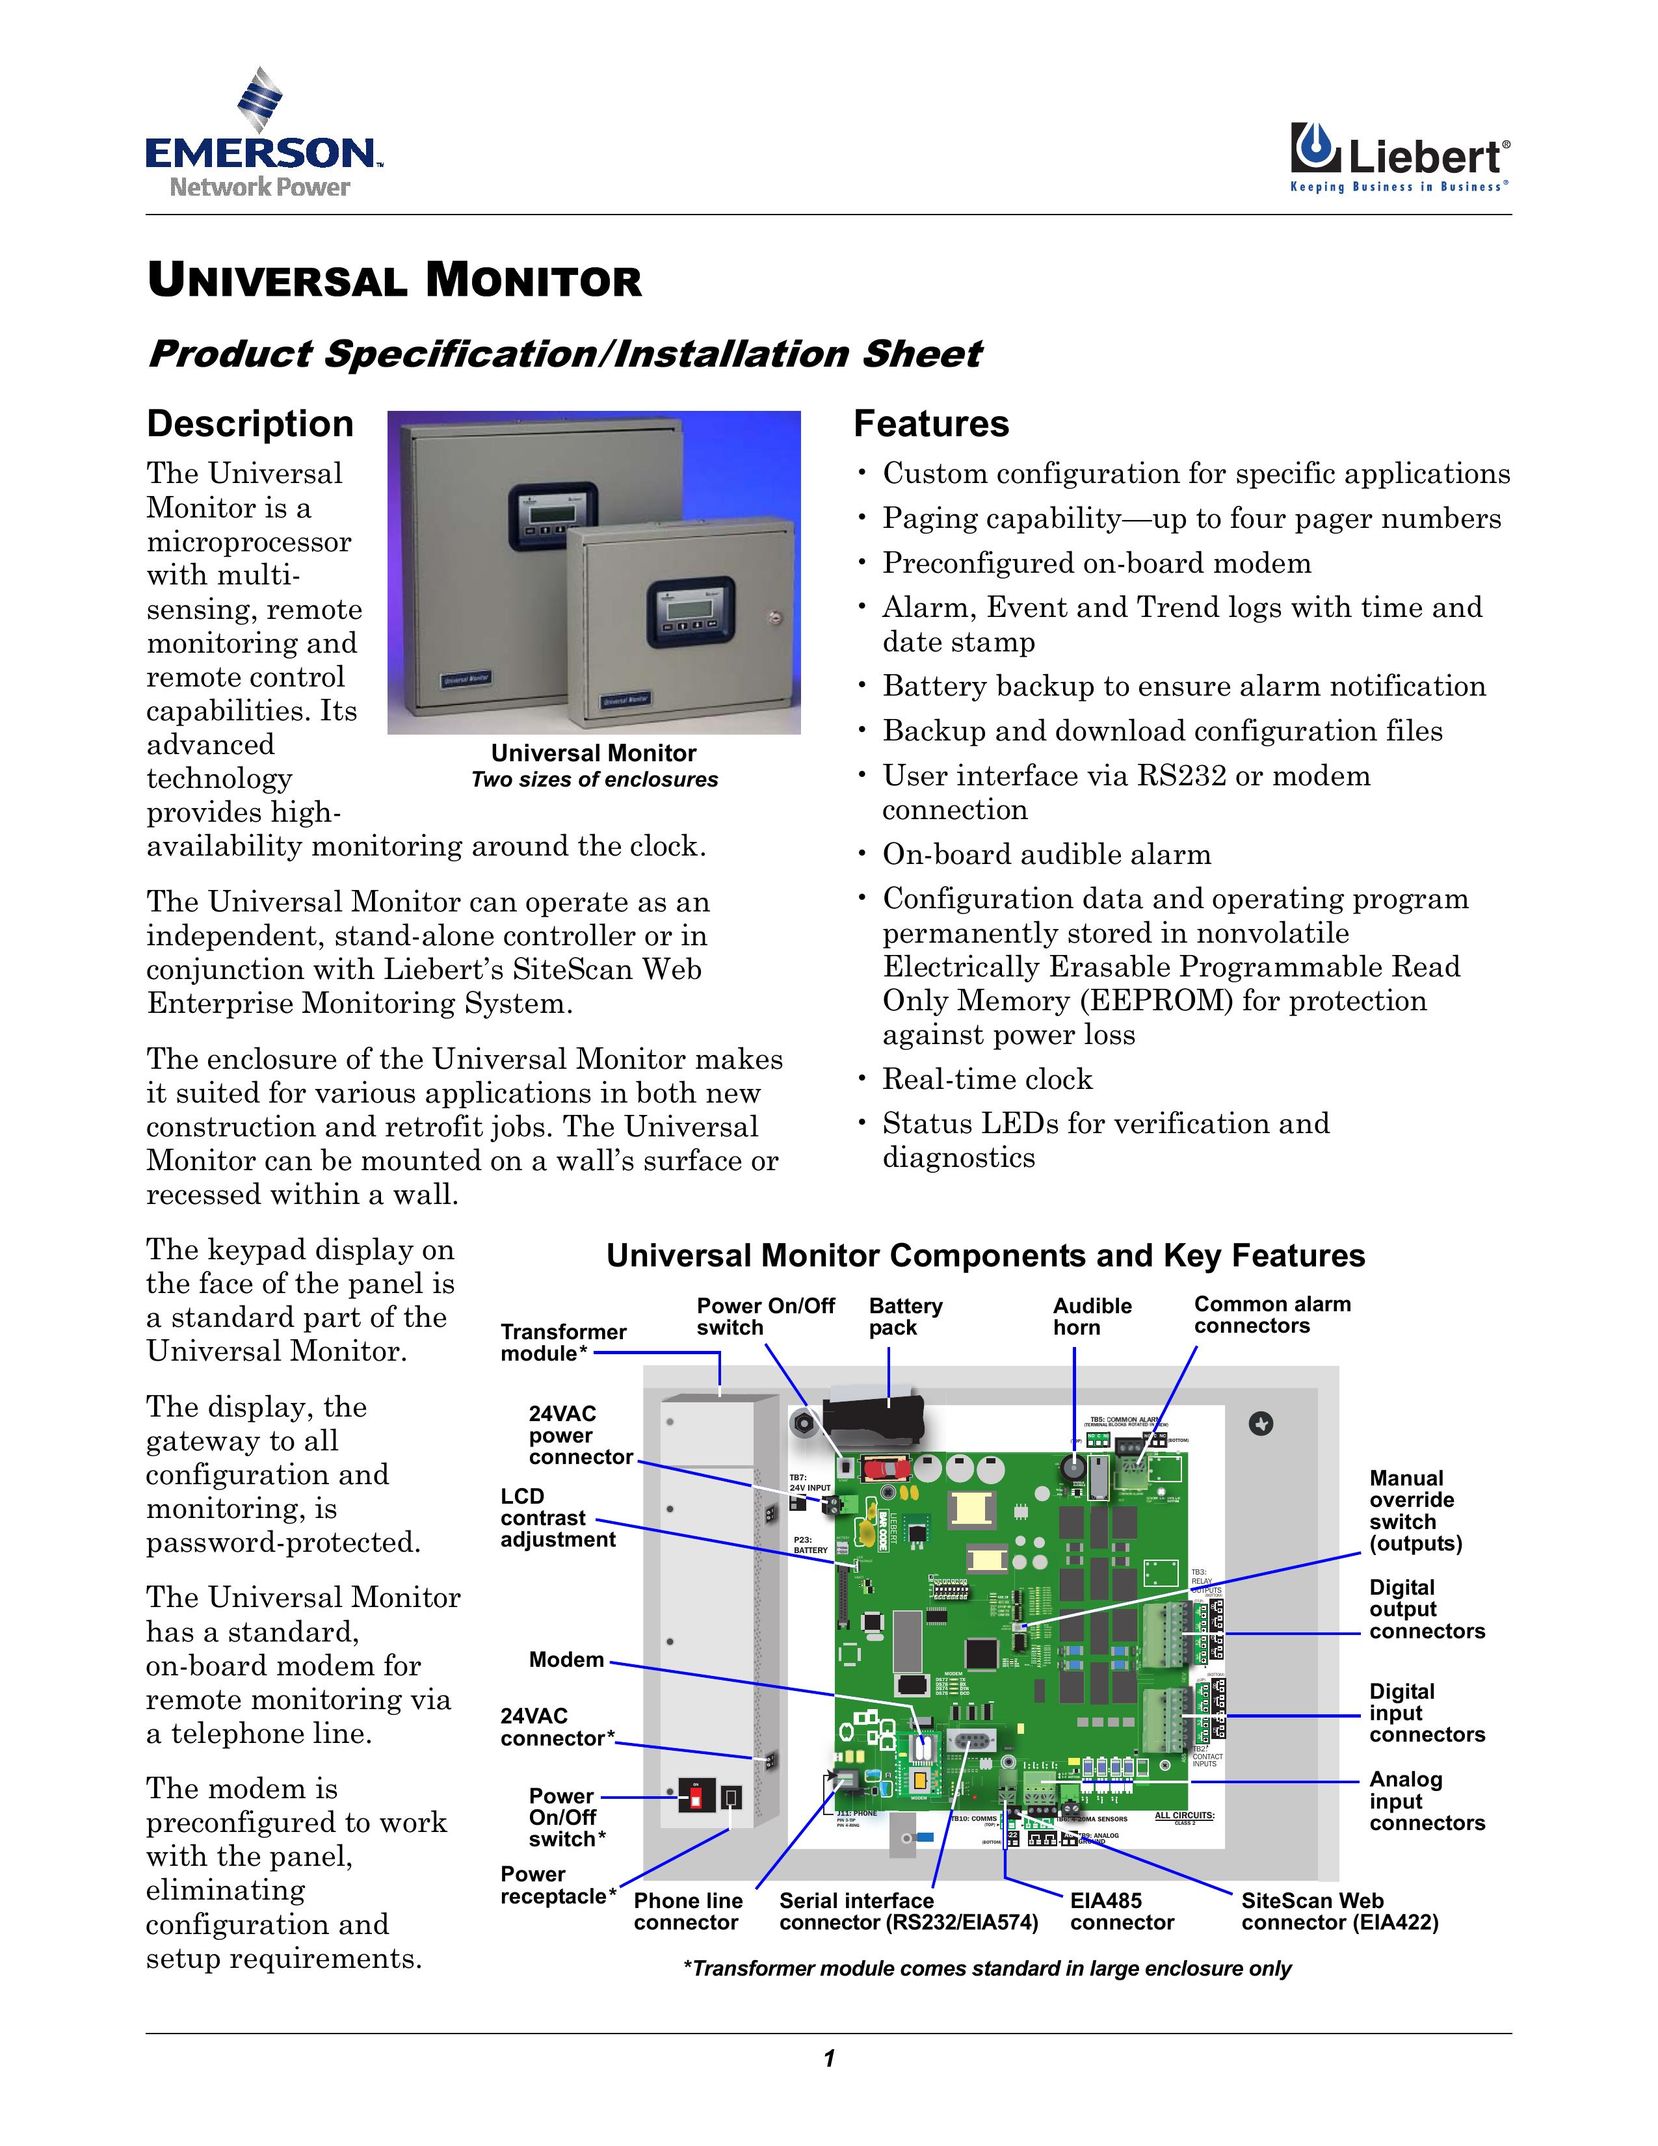 Emerson UMS02400 Pager User Manual